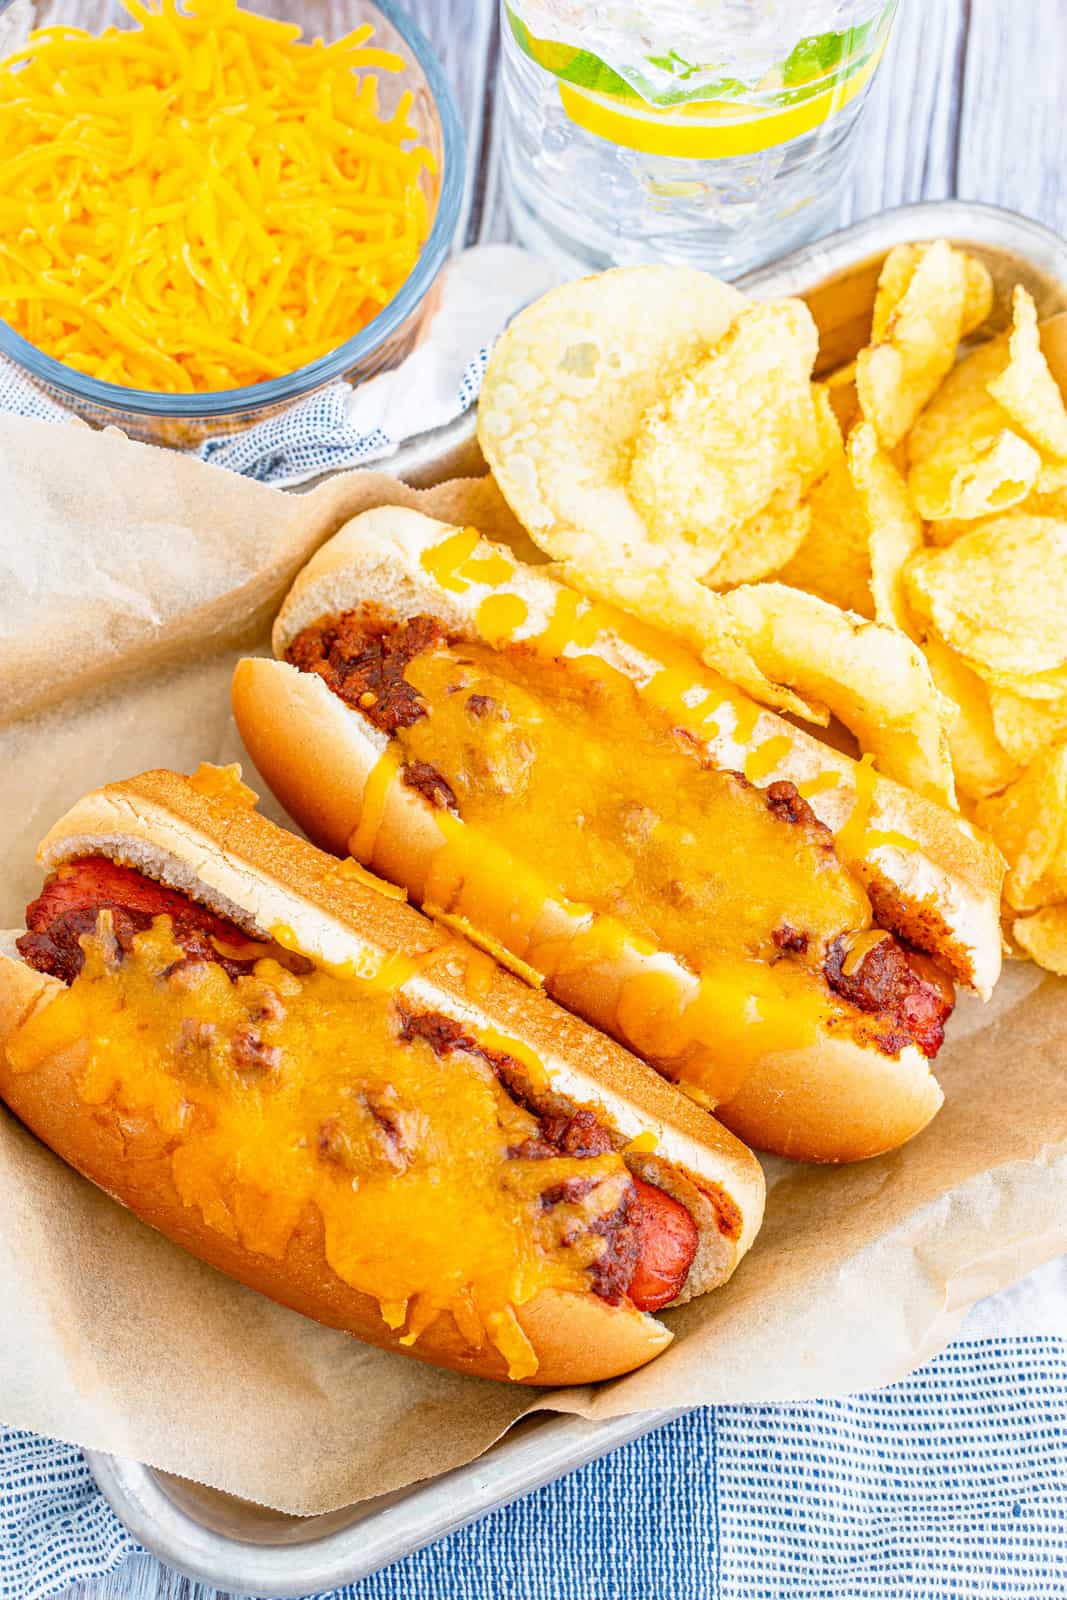 Overhead image of two Chili Dog Recipe with chips